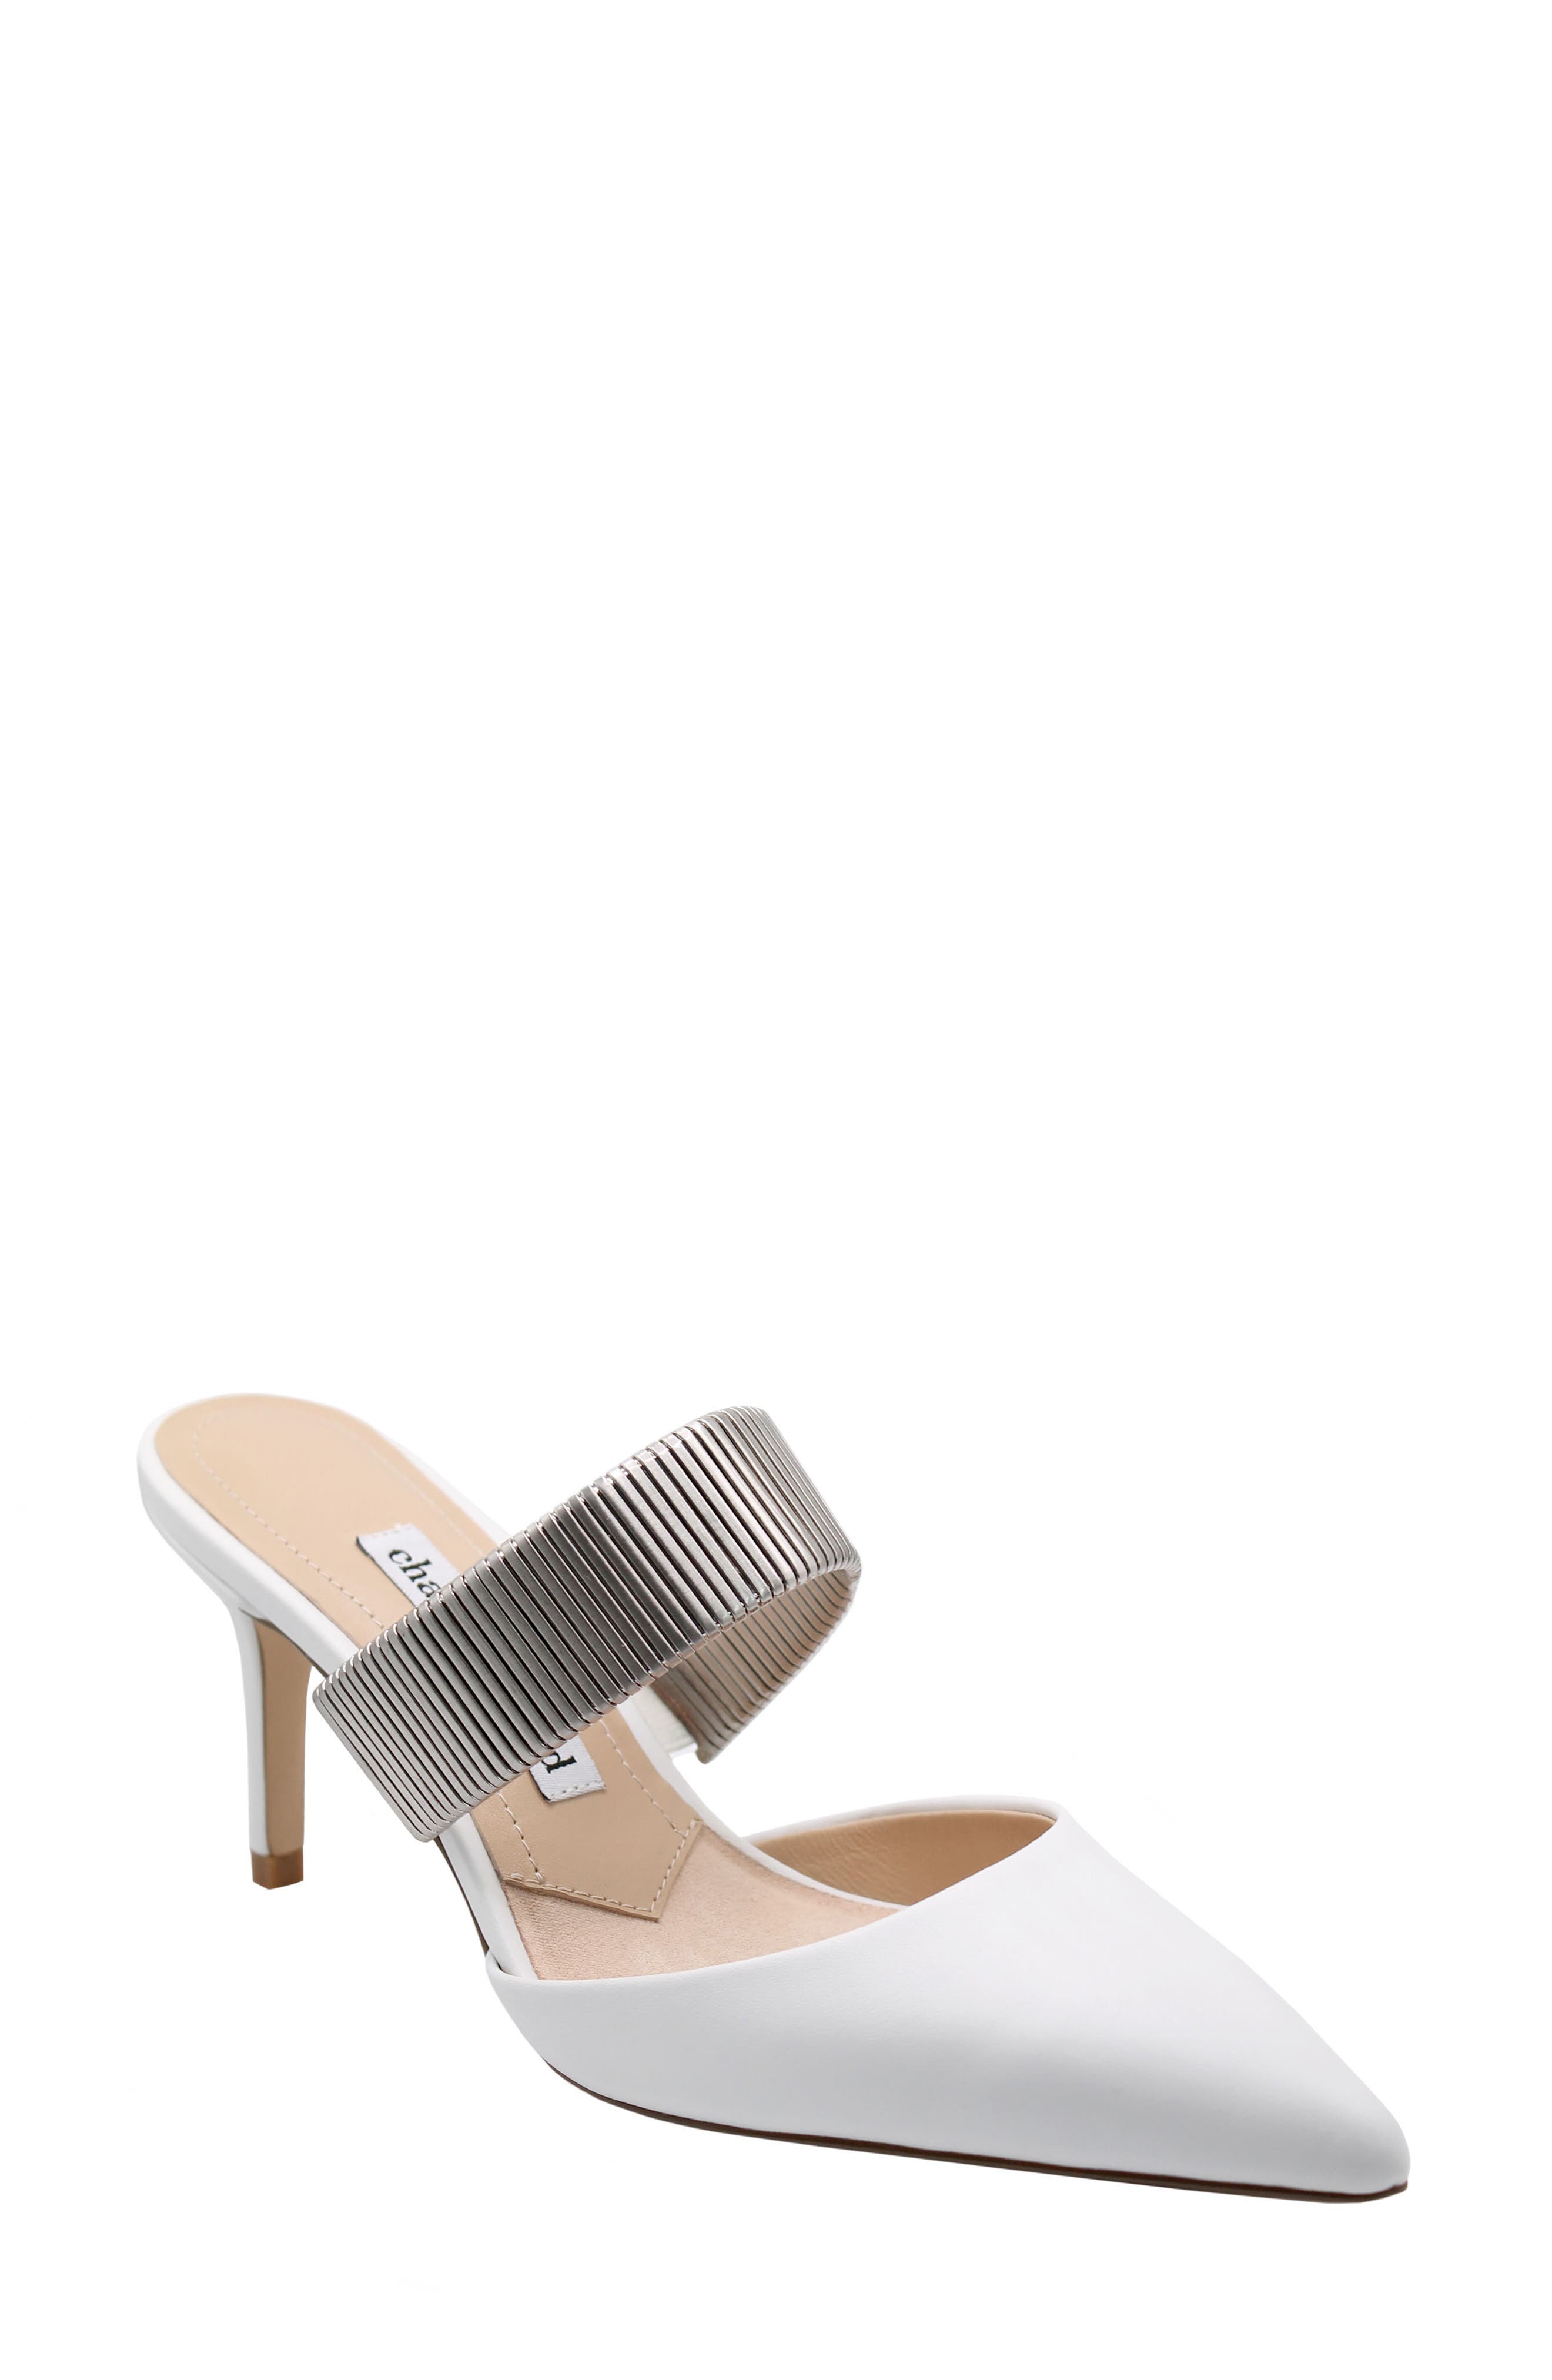 Women's Charles David Clothing, Shoes  Accessories Nordstrom